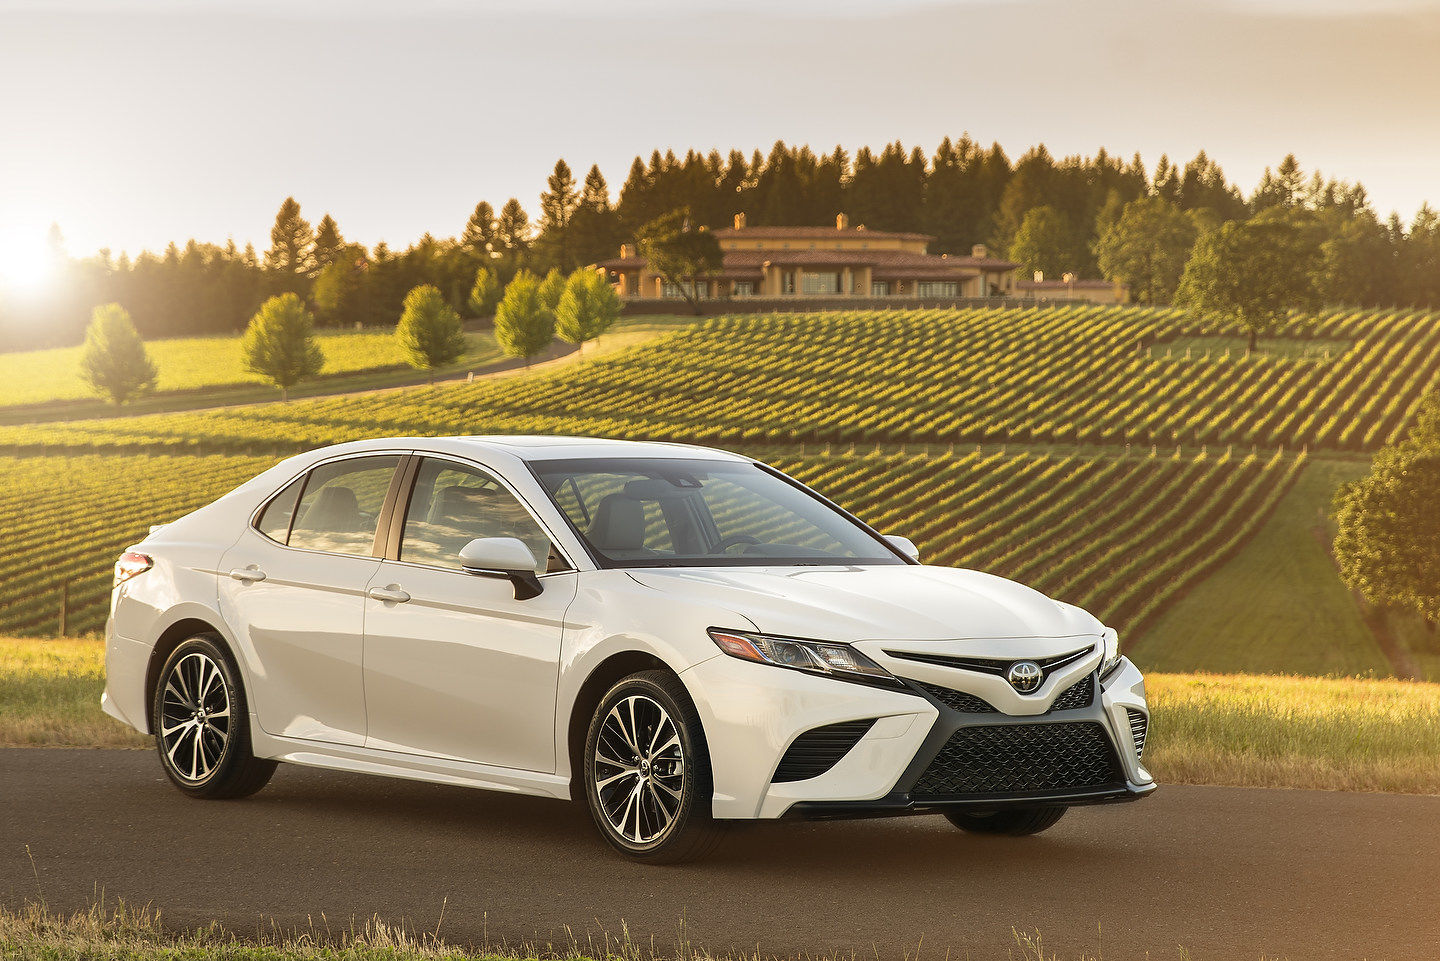 2019 Toyota Camry: Comfort mixed with performance